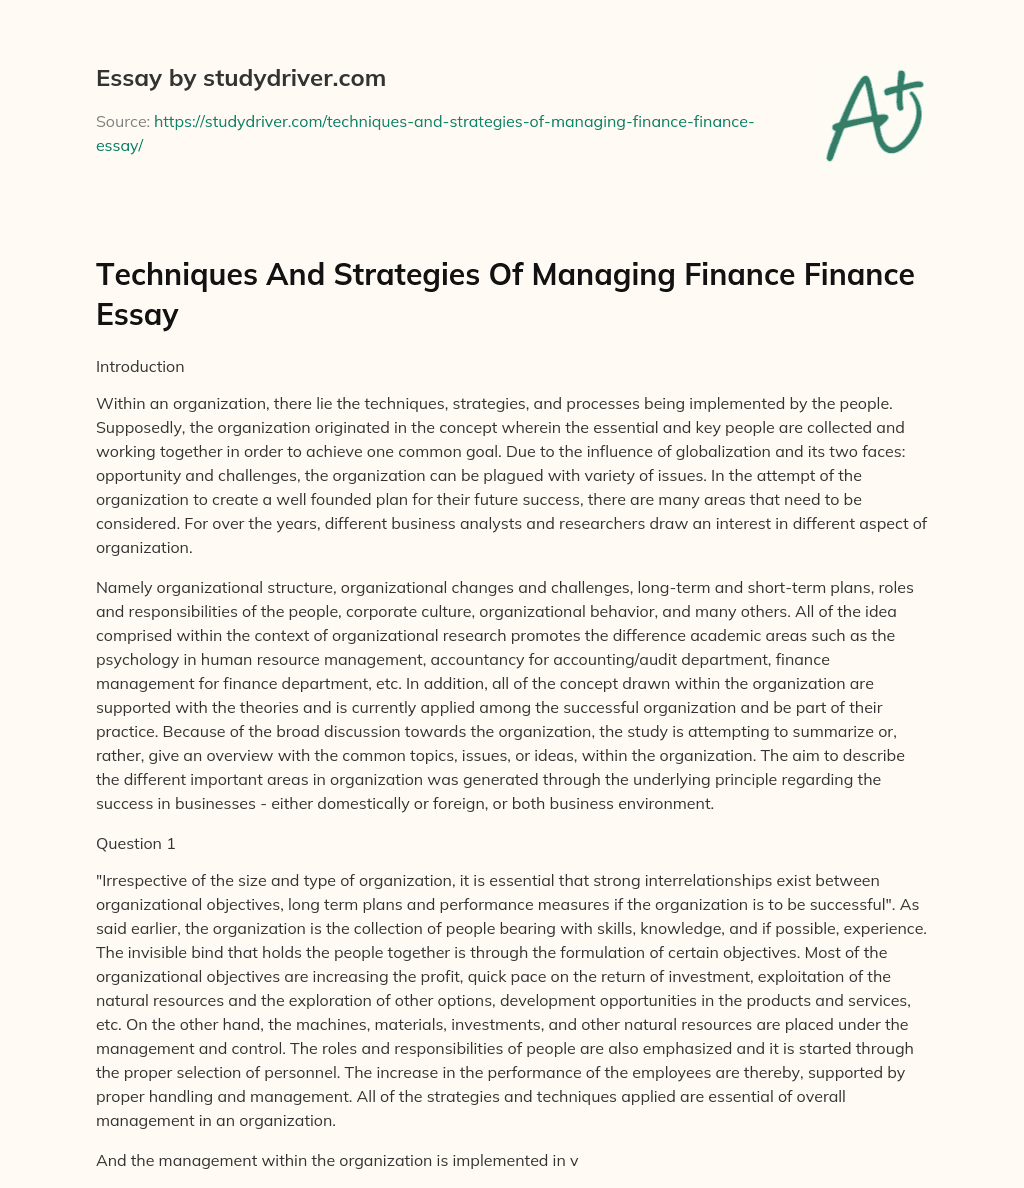 Techniques and Strategies of Managing Finance Finance Essay essay